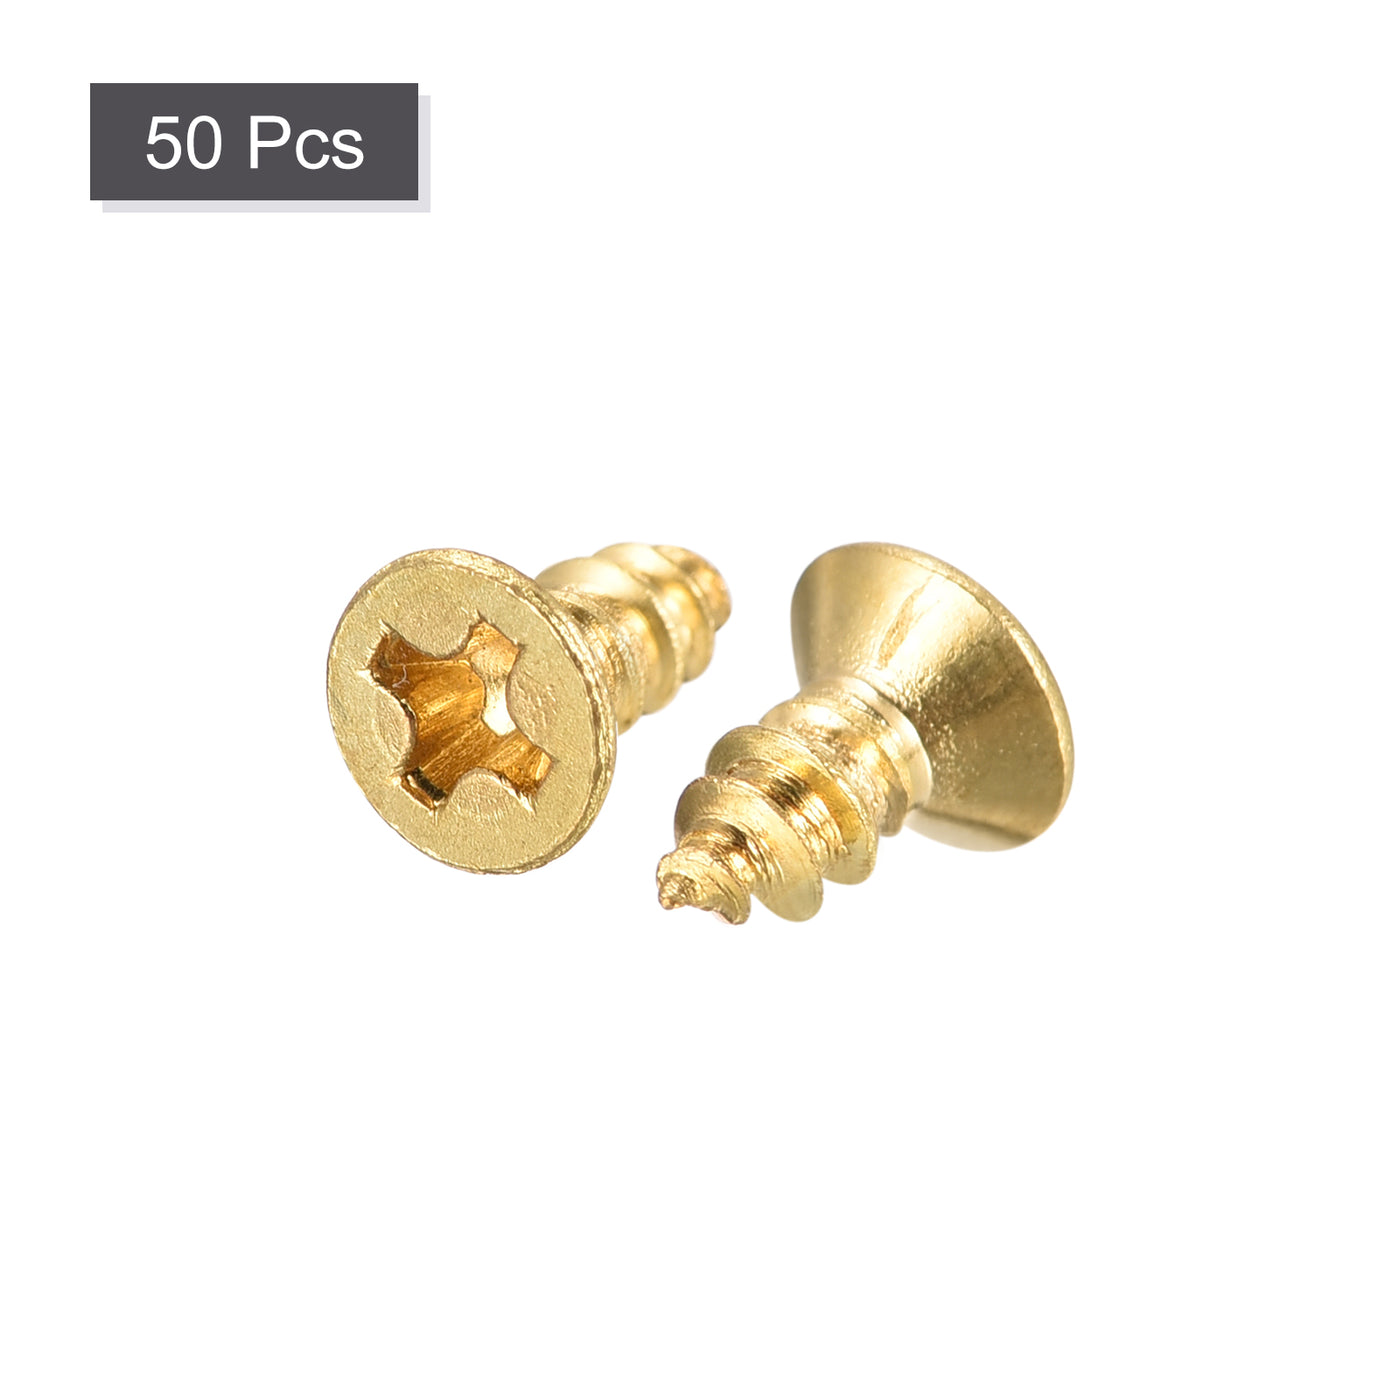 Uxcell Uxcell Brass Wood Screws, M3.5x12mm Phillips Flat Head Self Tapping Connector for Door, Cabinet, Wooden Furniture 50Pcs